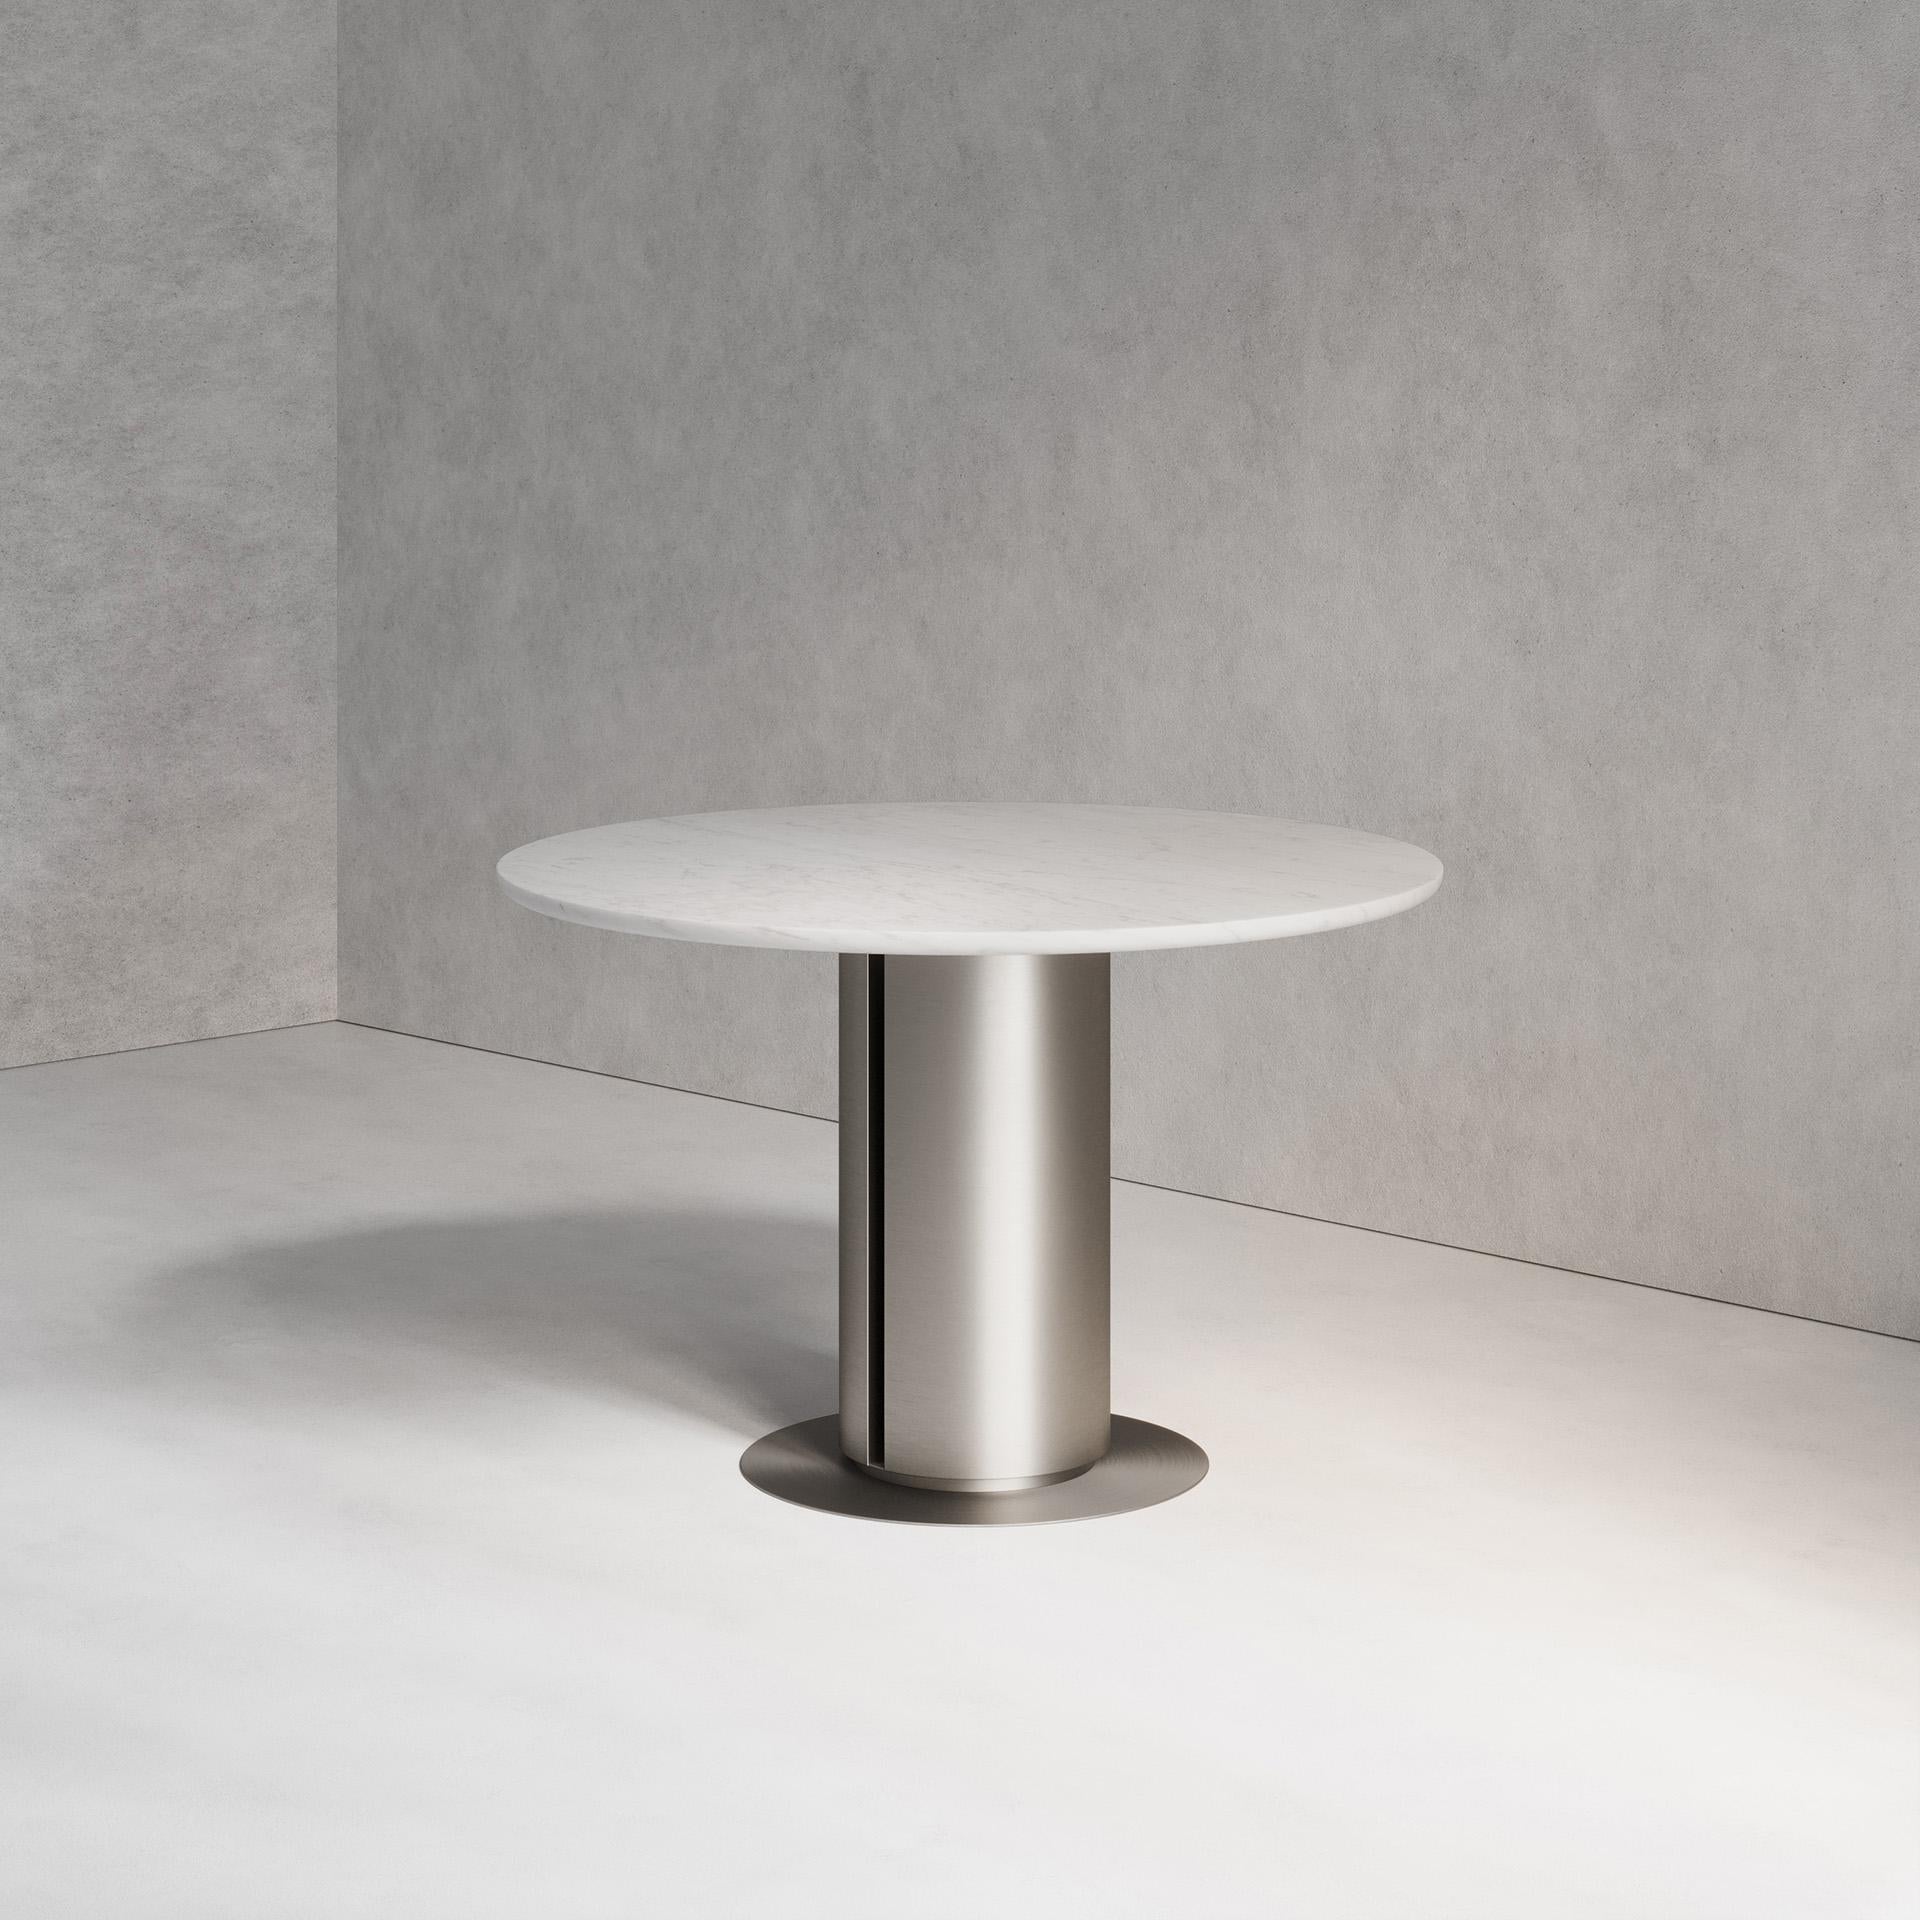 The Seleno Dining Table combines both steel and marble. Using brushed hand-spun steel and Bianco Lasa marble, this piece plays with both material properties and artisan finishes. Handmade in London.

Dimensions:
Dia. 120cm (47.24”) Height 76cm